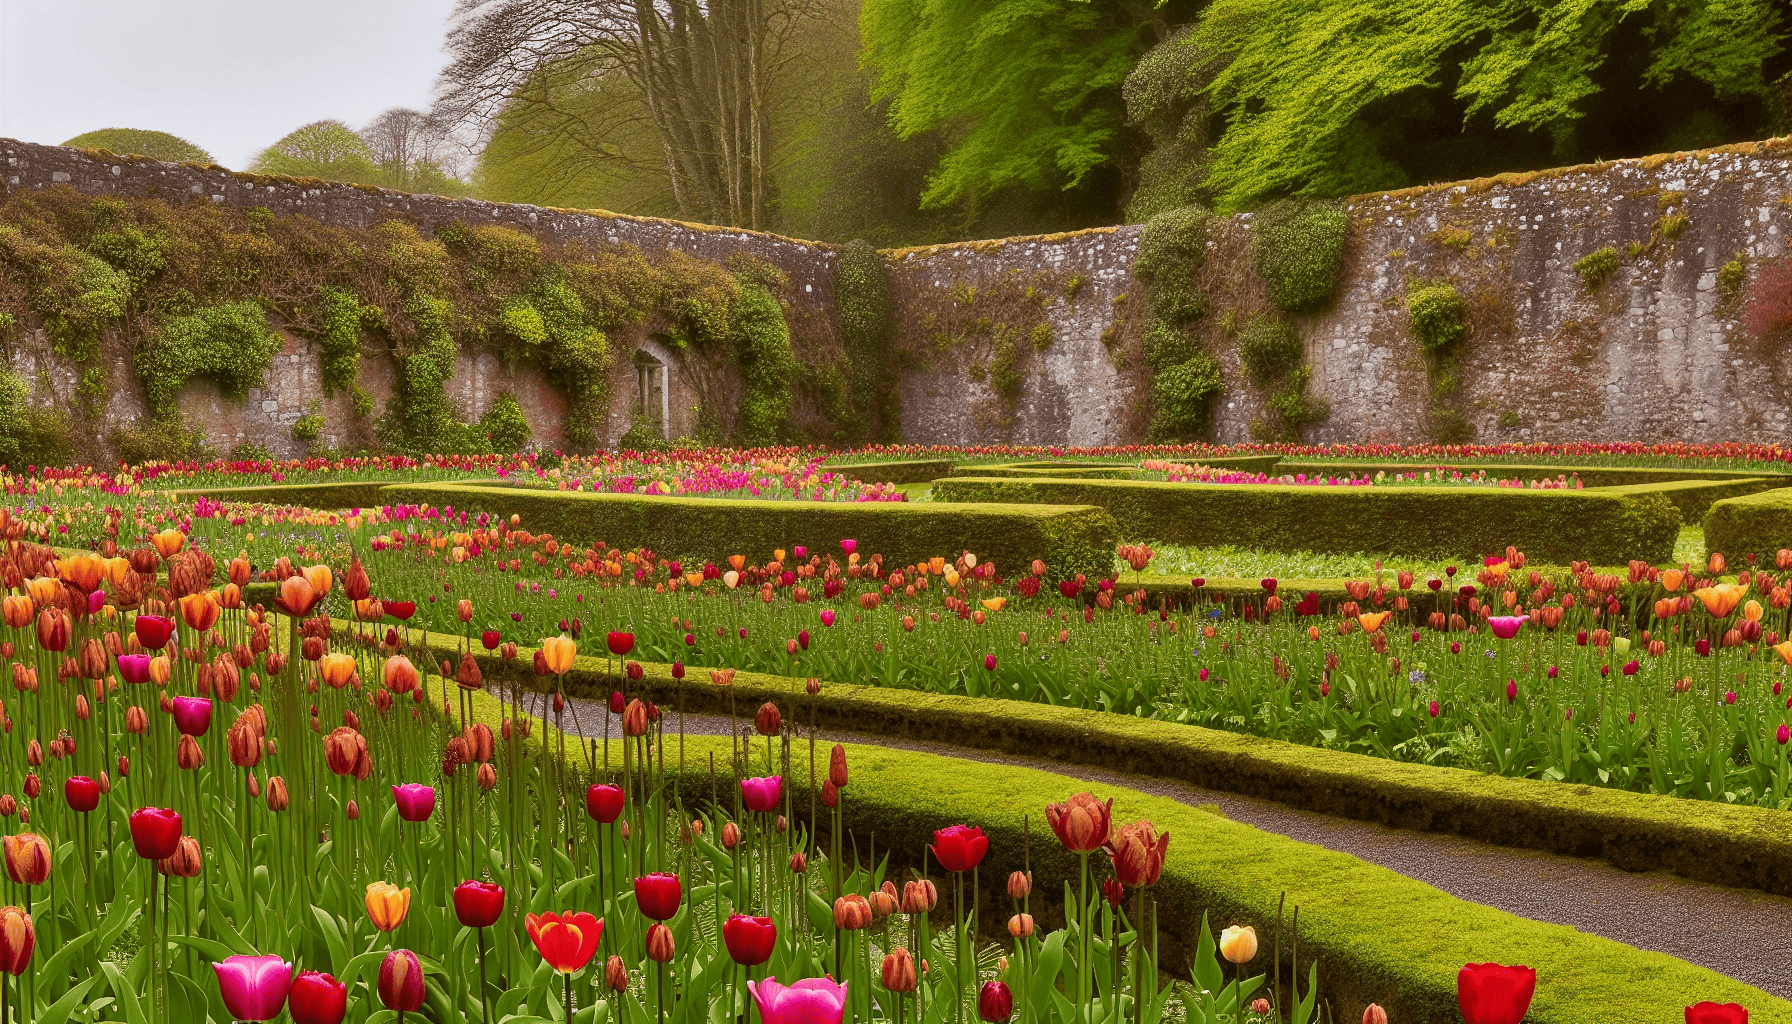 Colorful tulip blossoms in the enchanting Walled Garden at Glenarm Castle